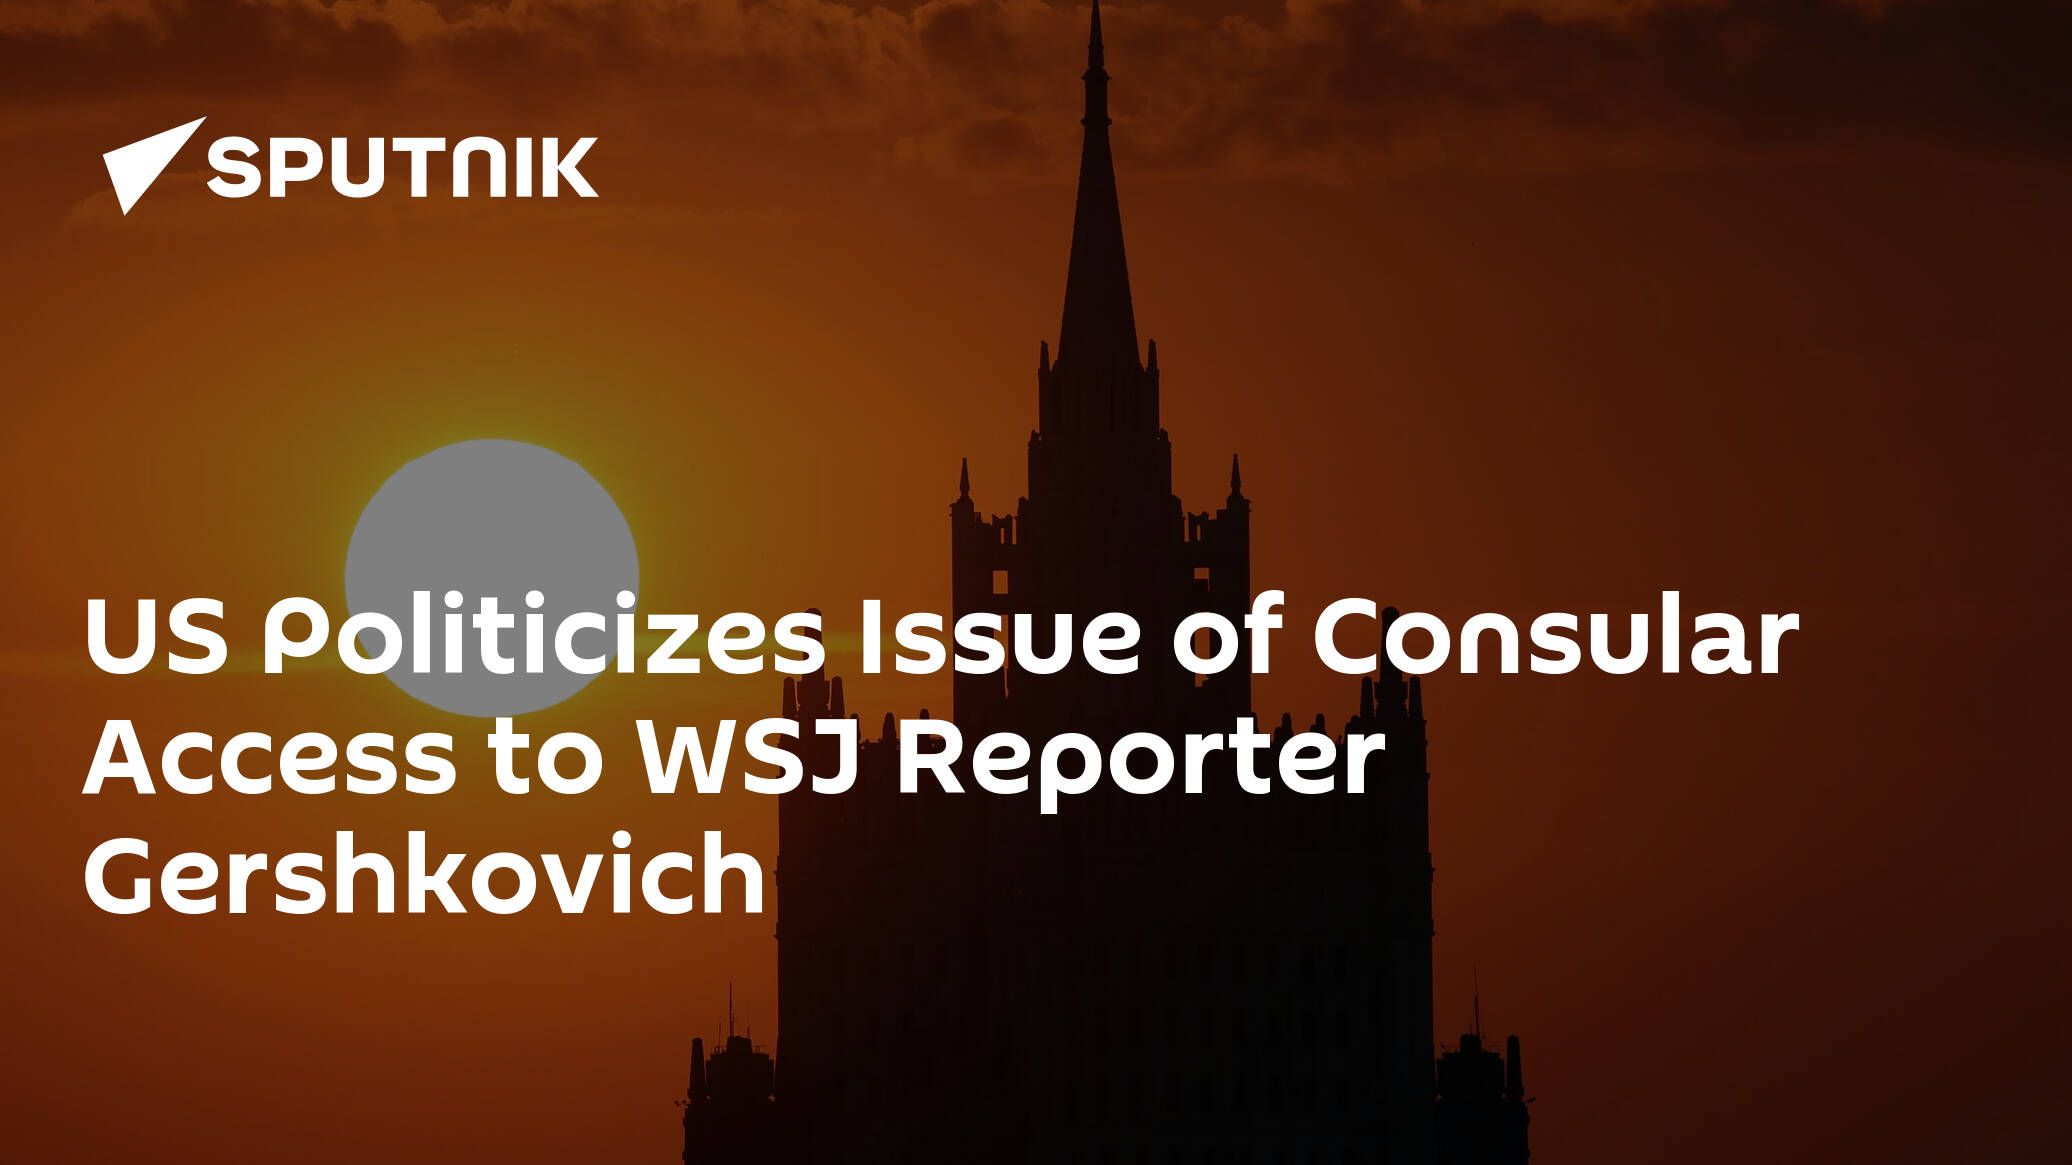 US Politicizes Issue of Consular Access to WSJ Reporter Gershkovich